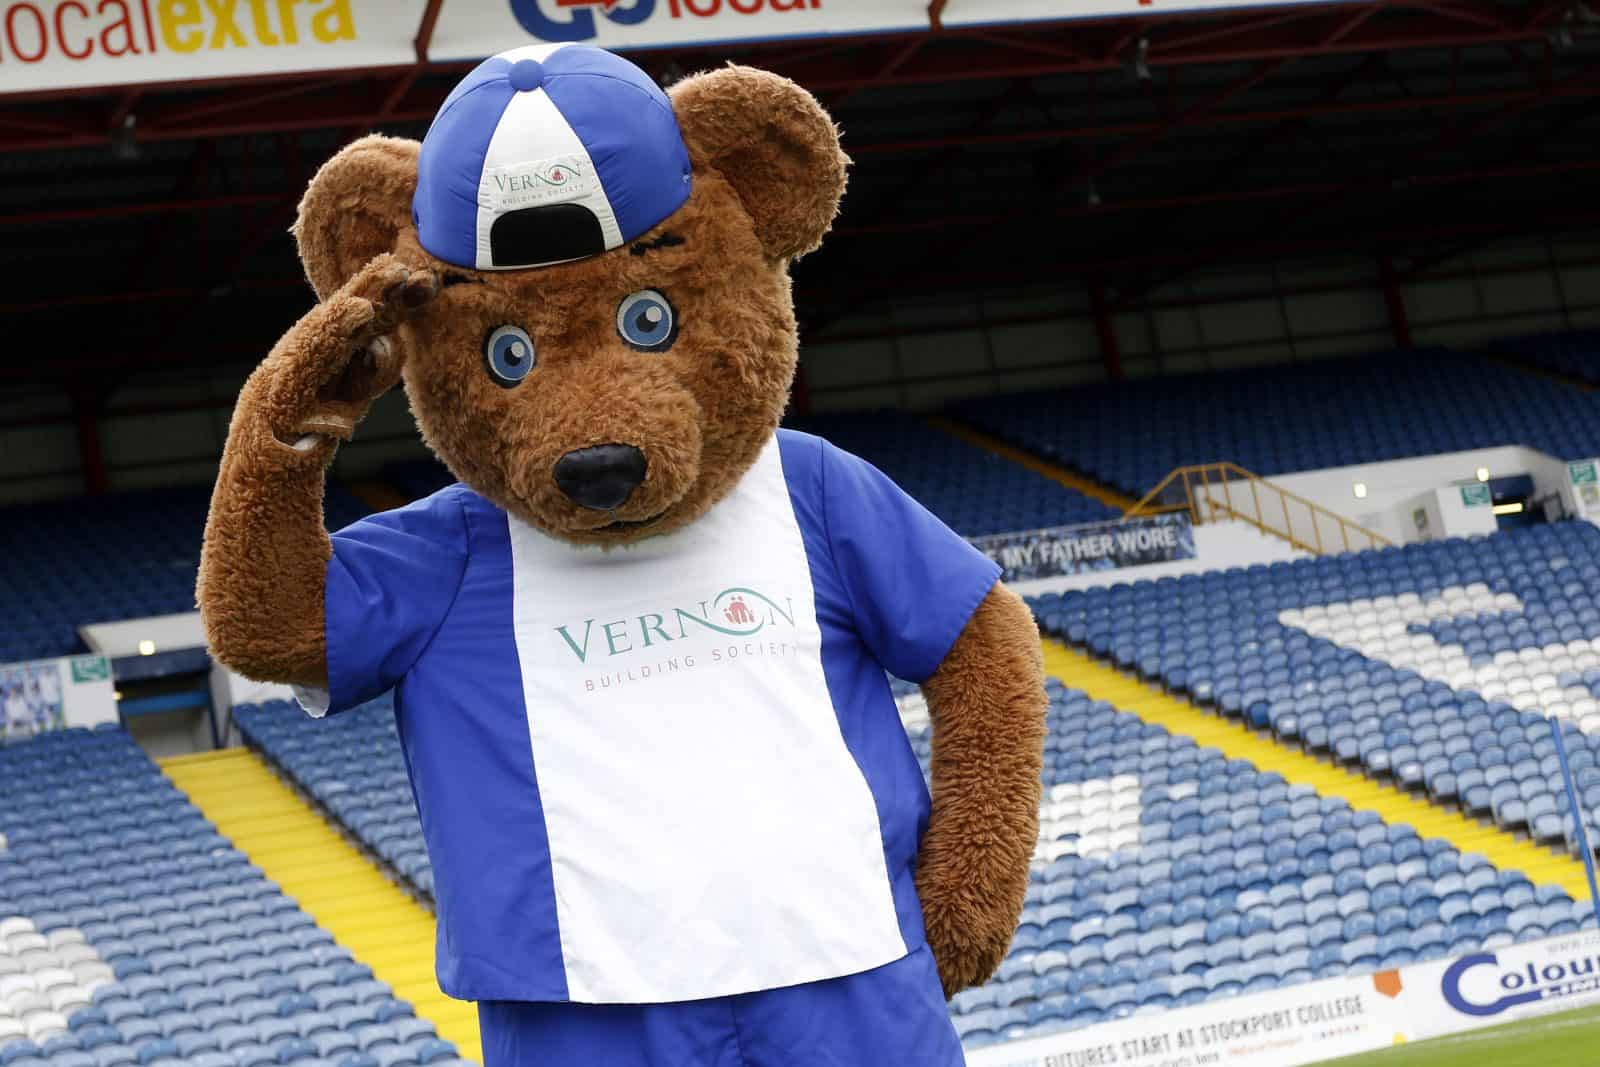 Family Lounge this Saturday - meet Vernon Bear - Stockport County